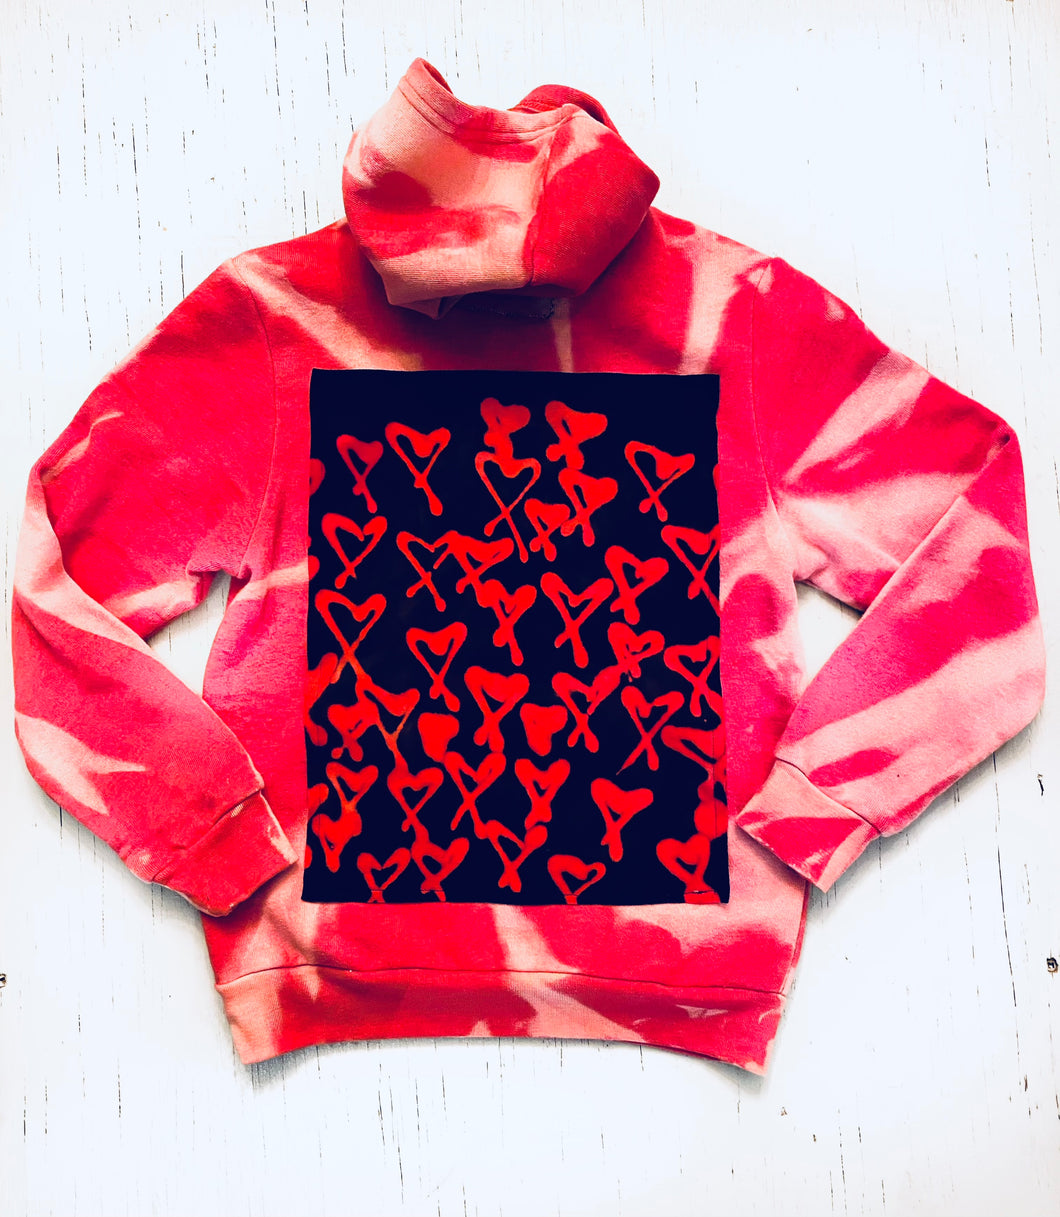 OG Bleach Dyed Hoodie with Oxydyed Hearts Adult